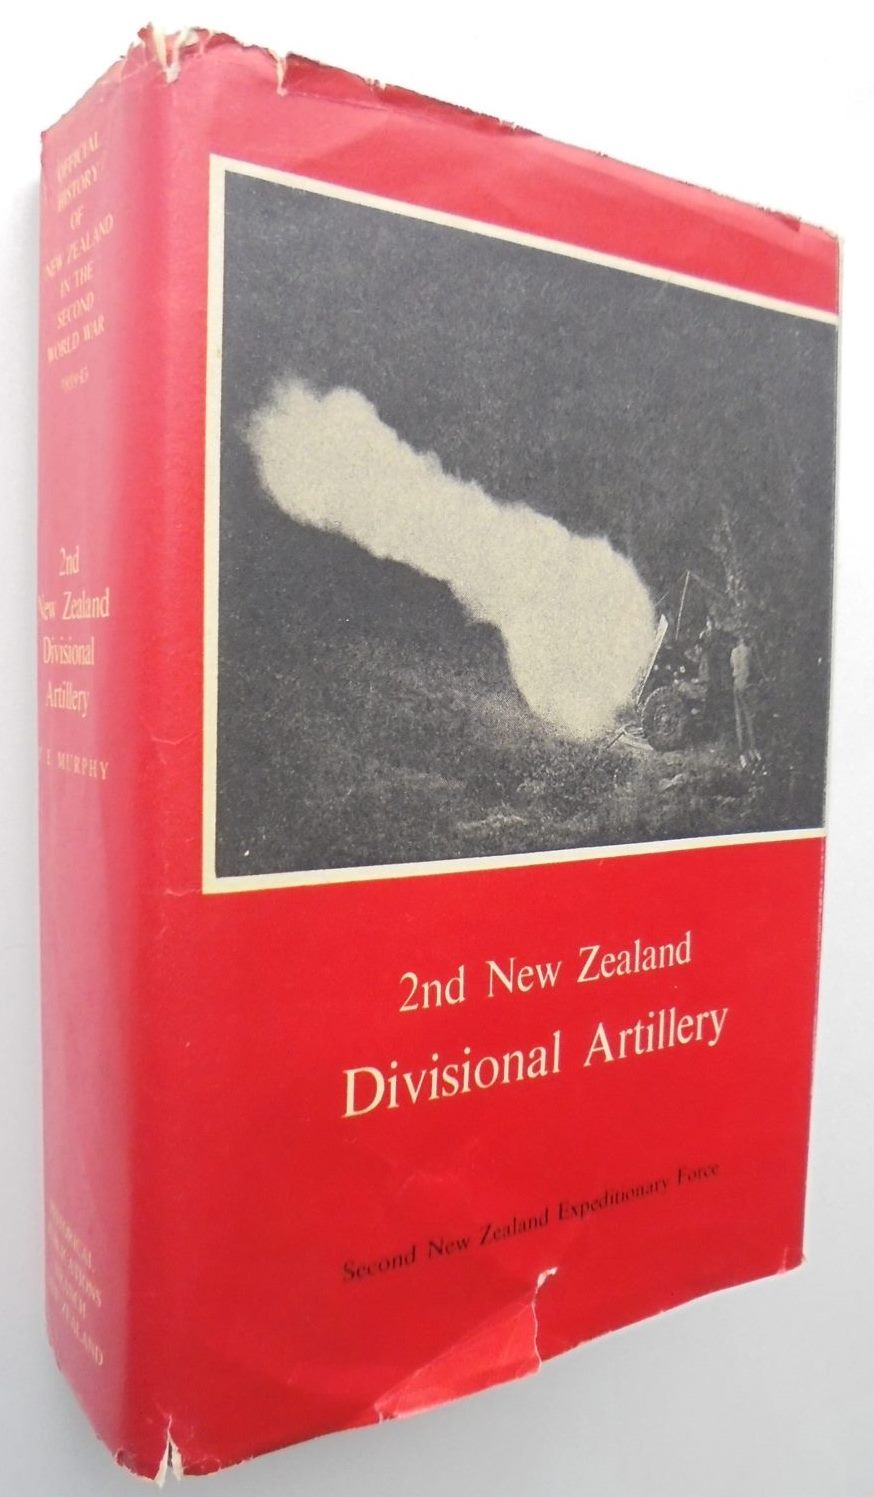 2nd New Zealand Divisional Artillery. Official History of New Zealand in the Second World War 1939-45. By W E Murphy.